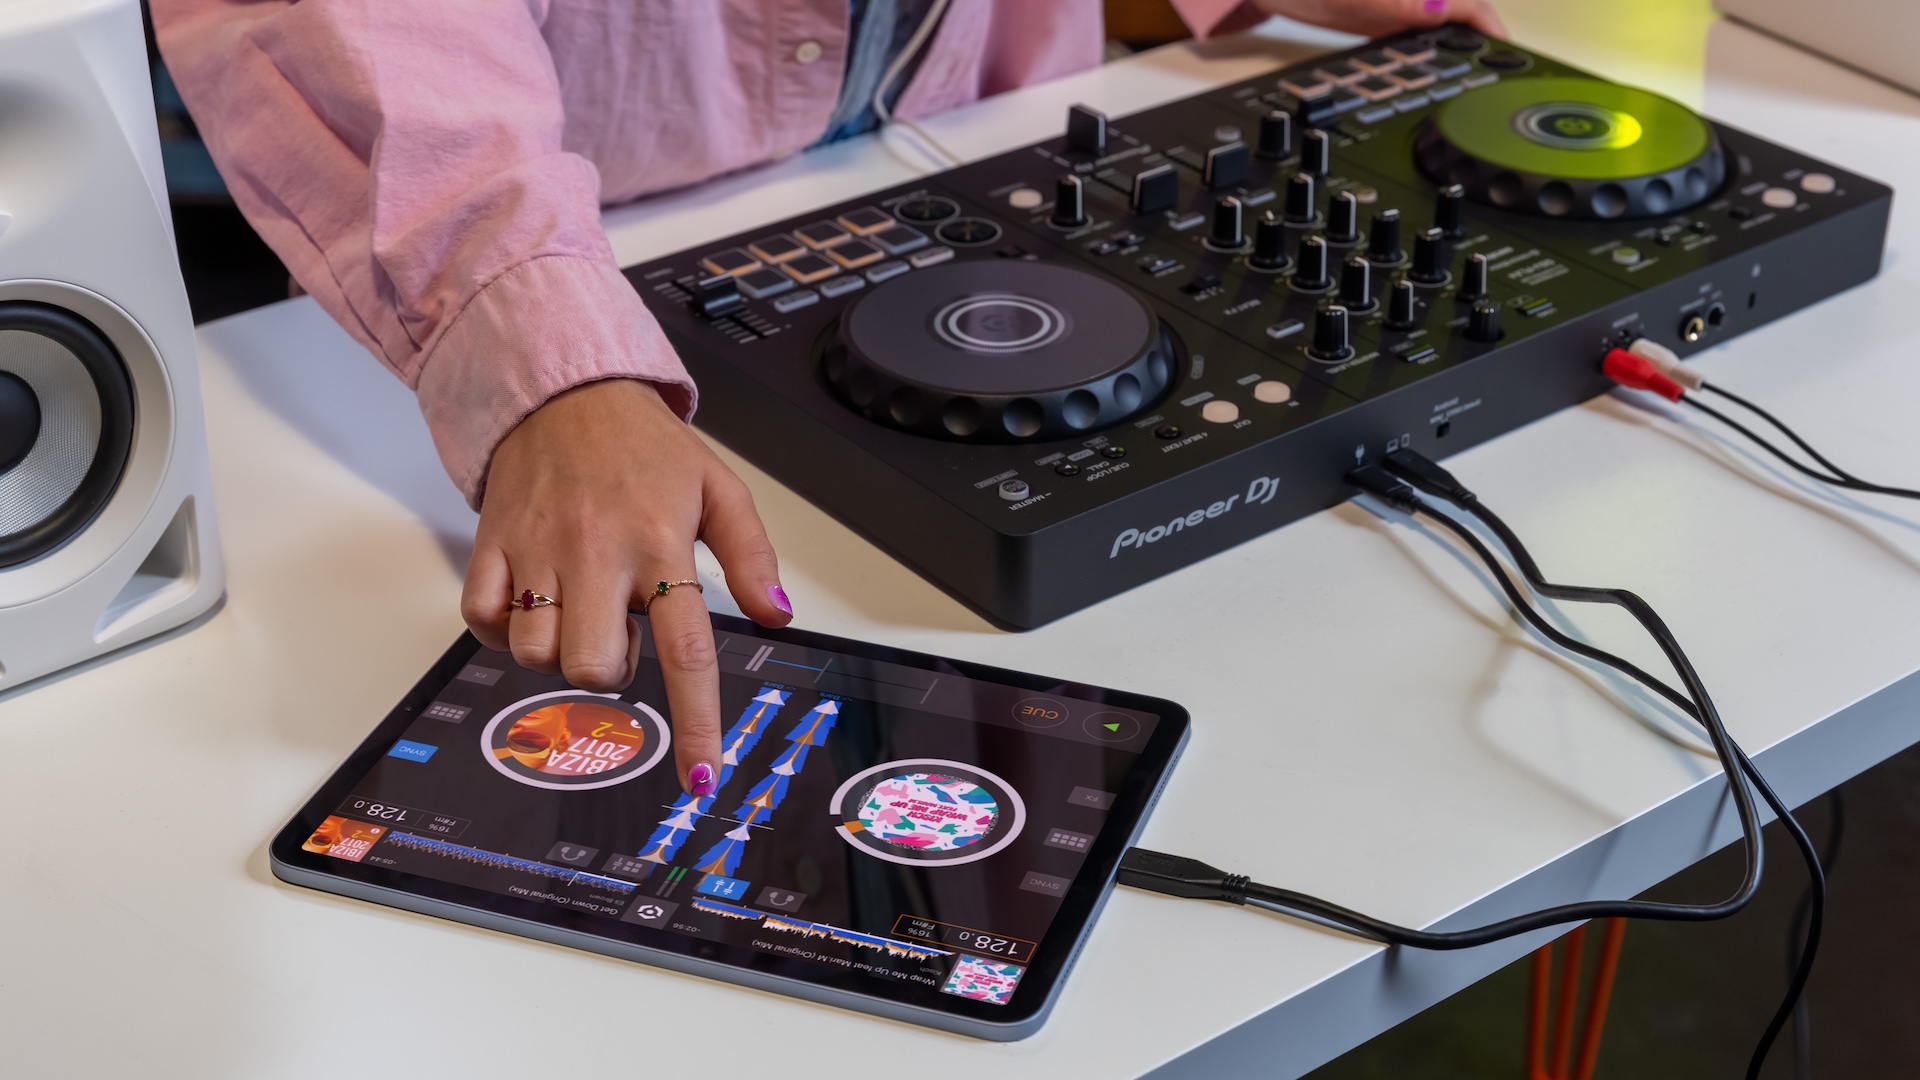 Prepare, Perform, ANYWHERE: Pioneer DJ Launches Major Upgrade to